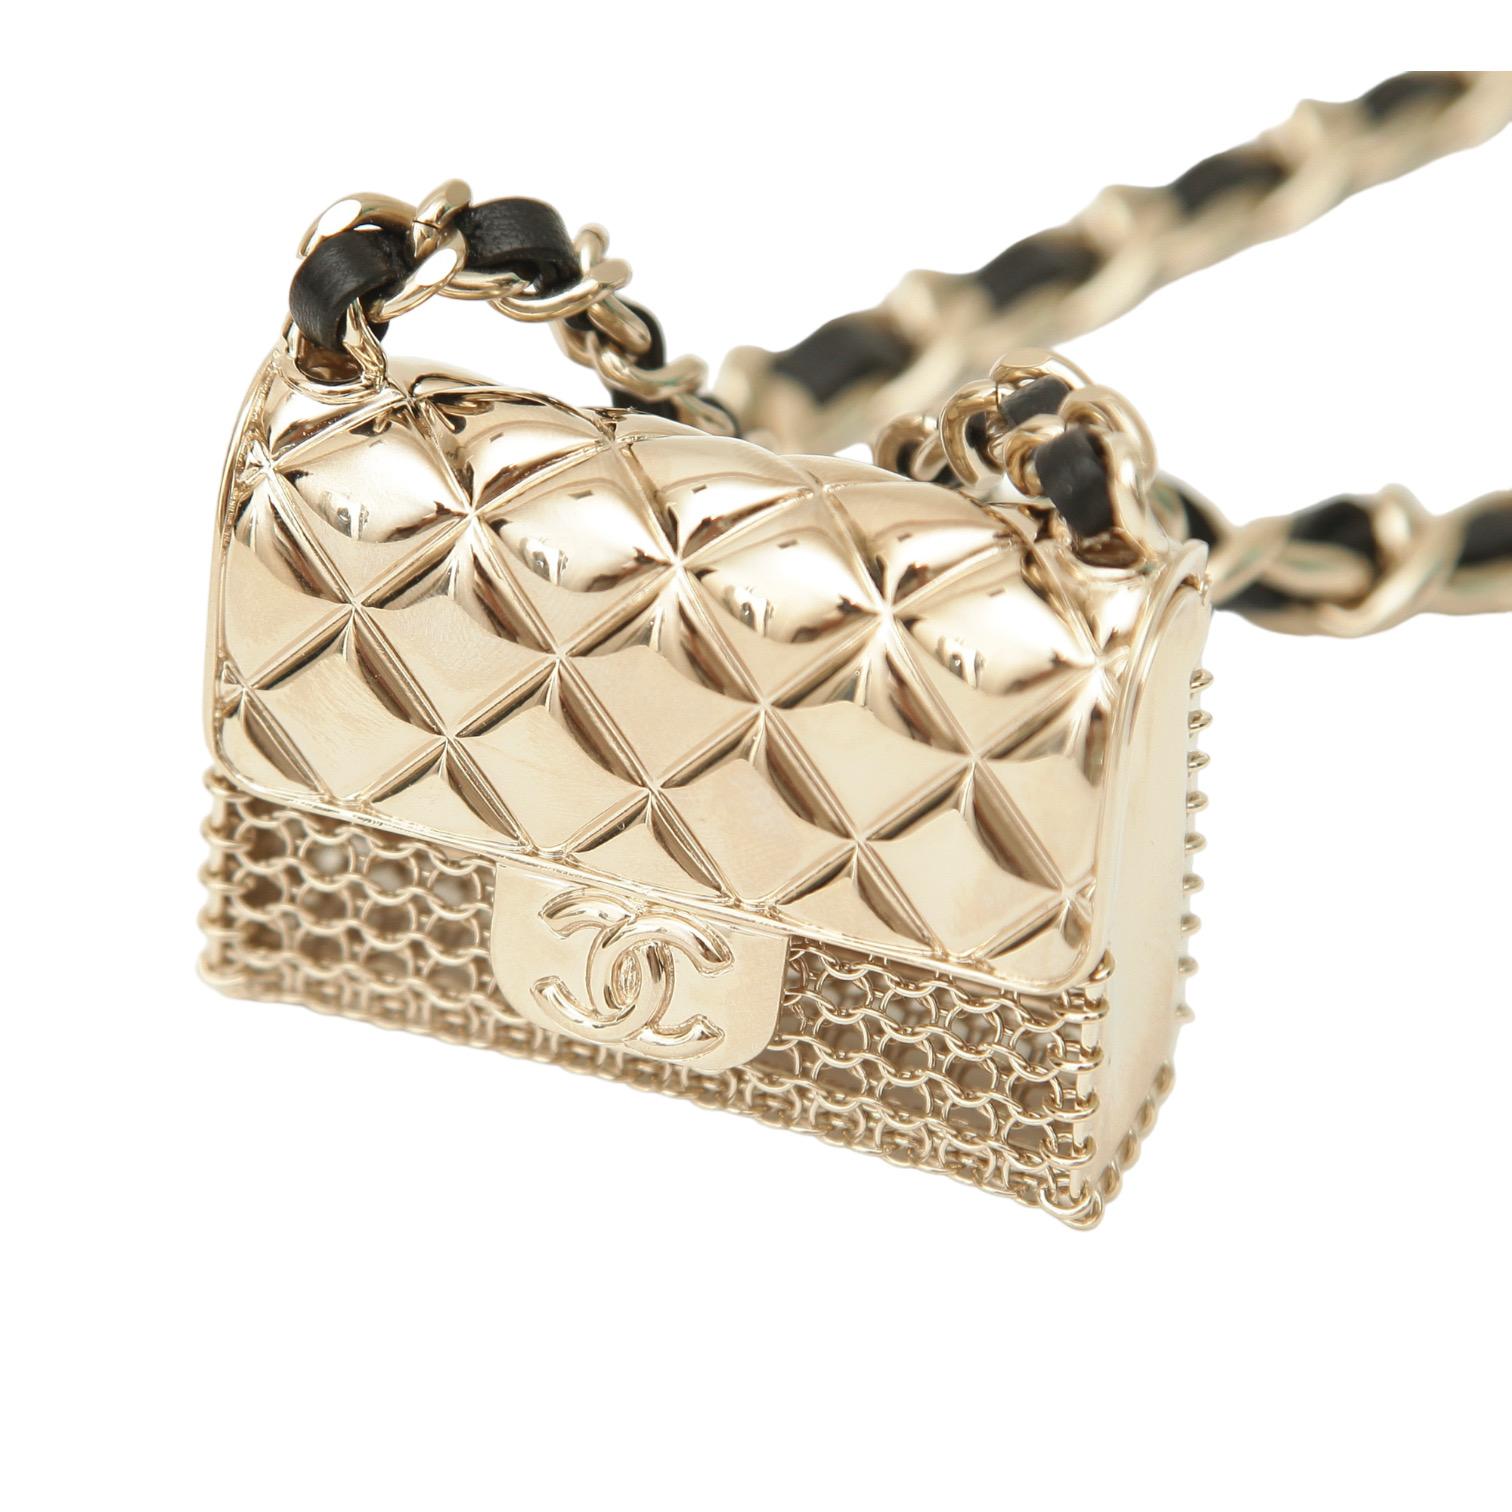 GUARANTEED AUTHENTIC CHANEL GOLD HW CC BAG CHARM CHAIN BELT

Authenticated by RealAuthentication

- This design is from the Spring/Summer 2021 collection.
   There was additional production in 2022.
- Gold-tone chain belt with black leather.
-